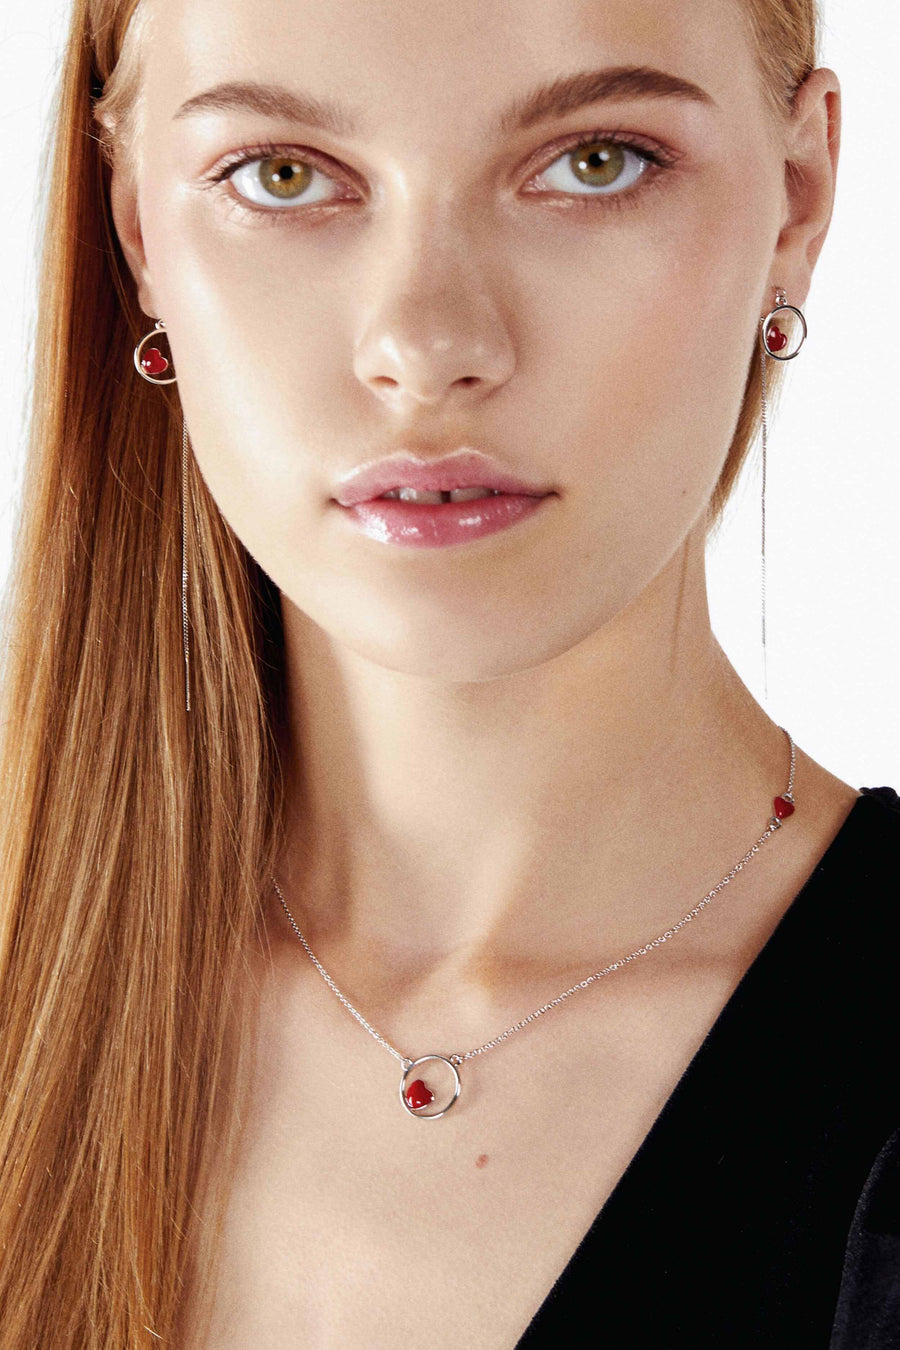 Lovesick Jewelry Sterling Silver Red Heart Threader Earrings Necklace